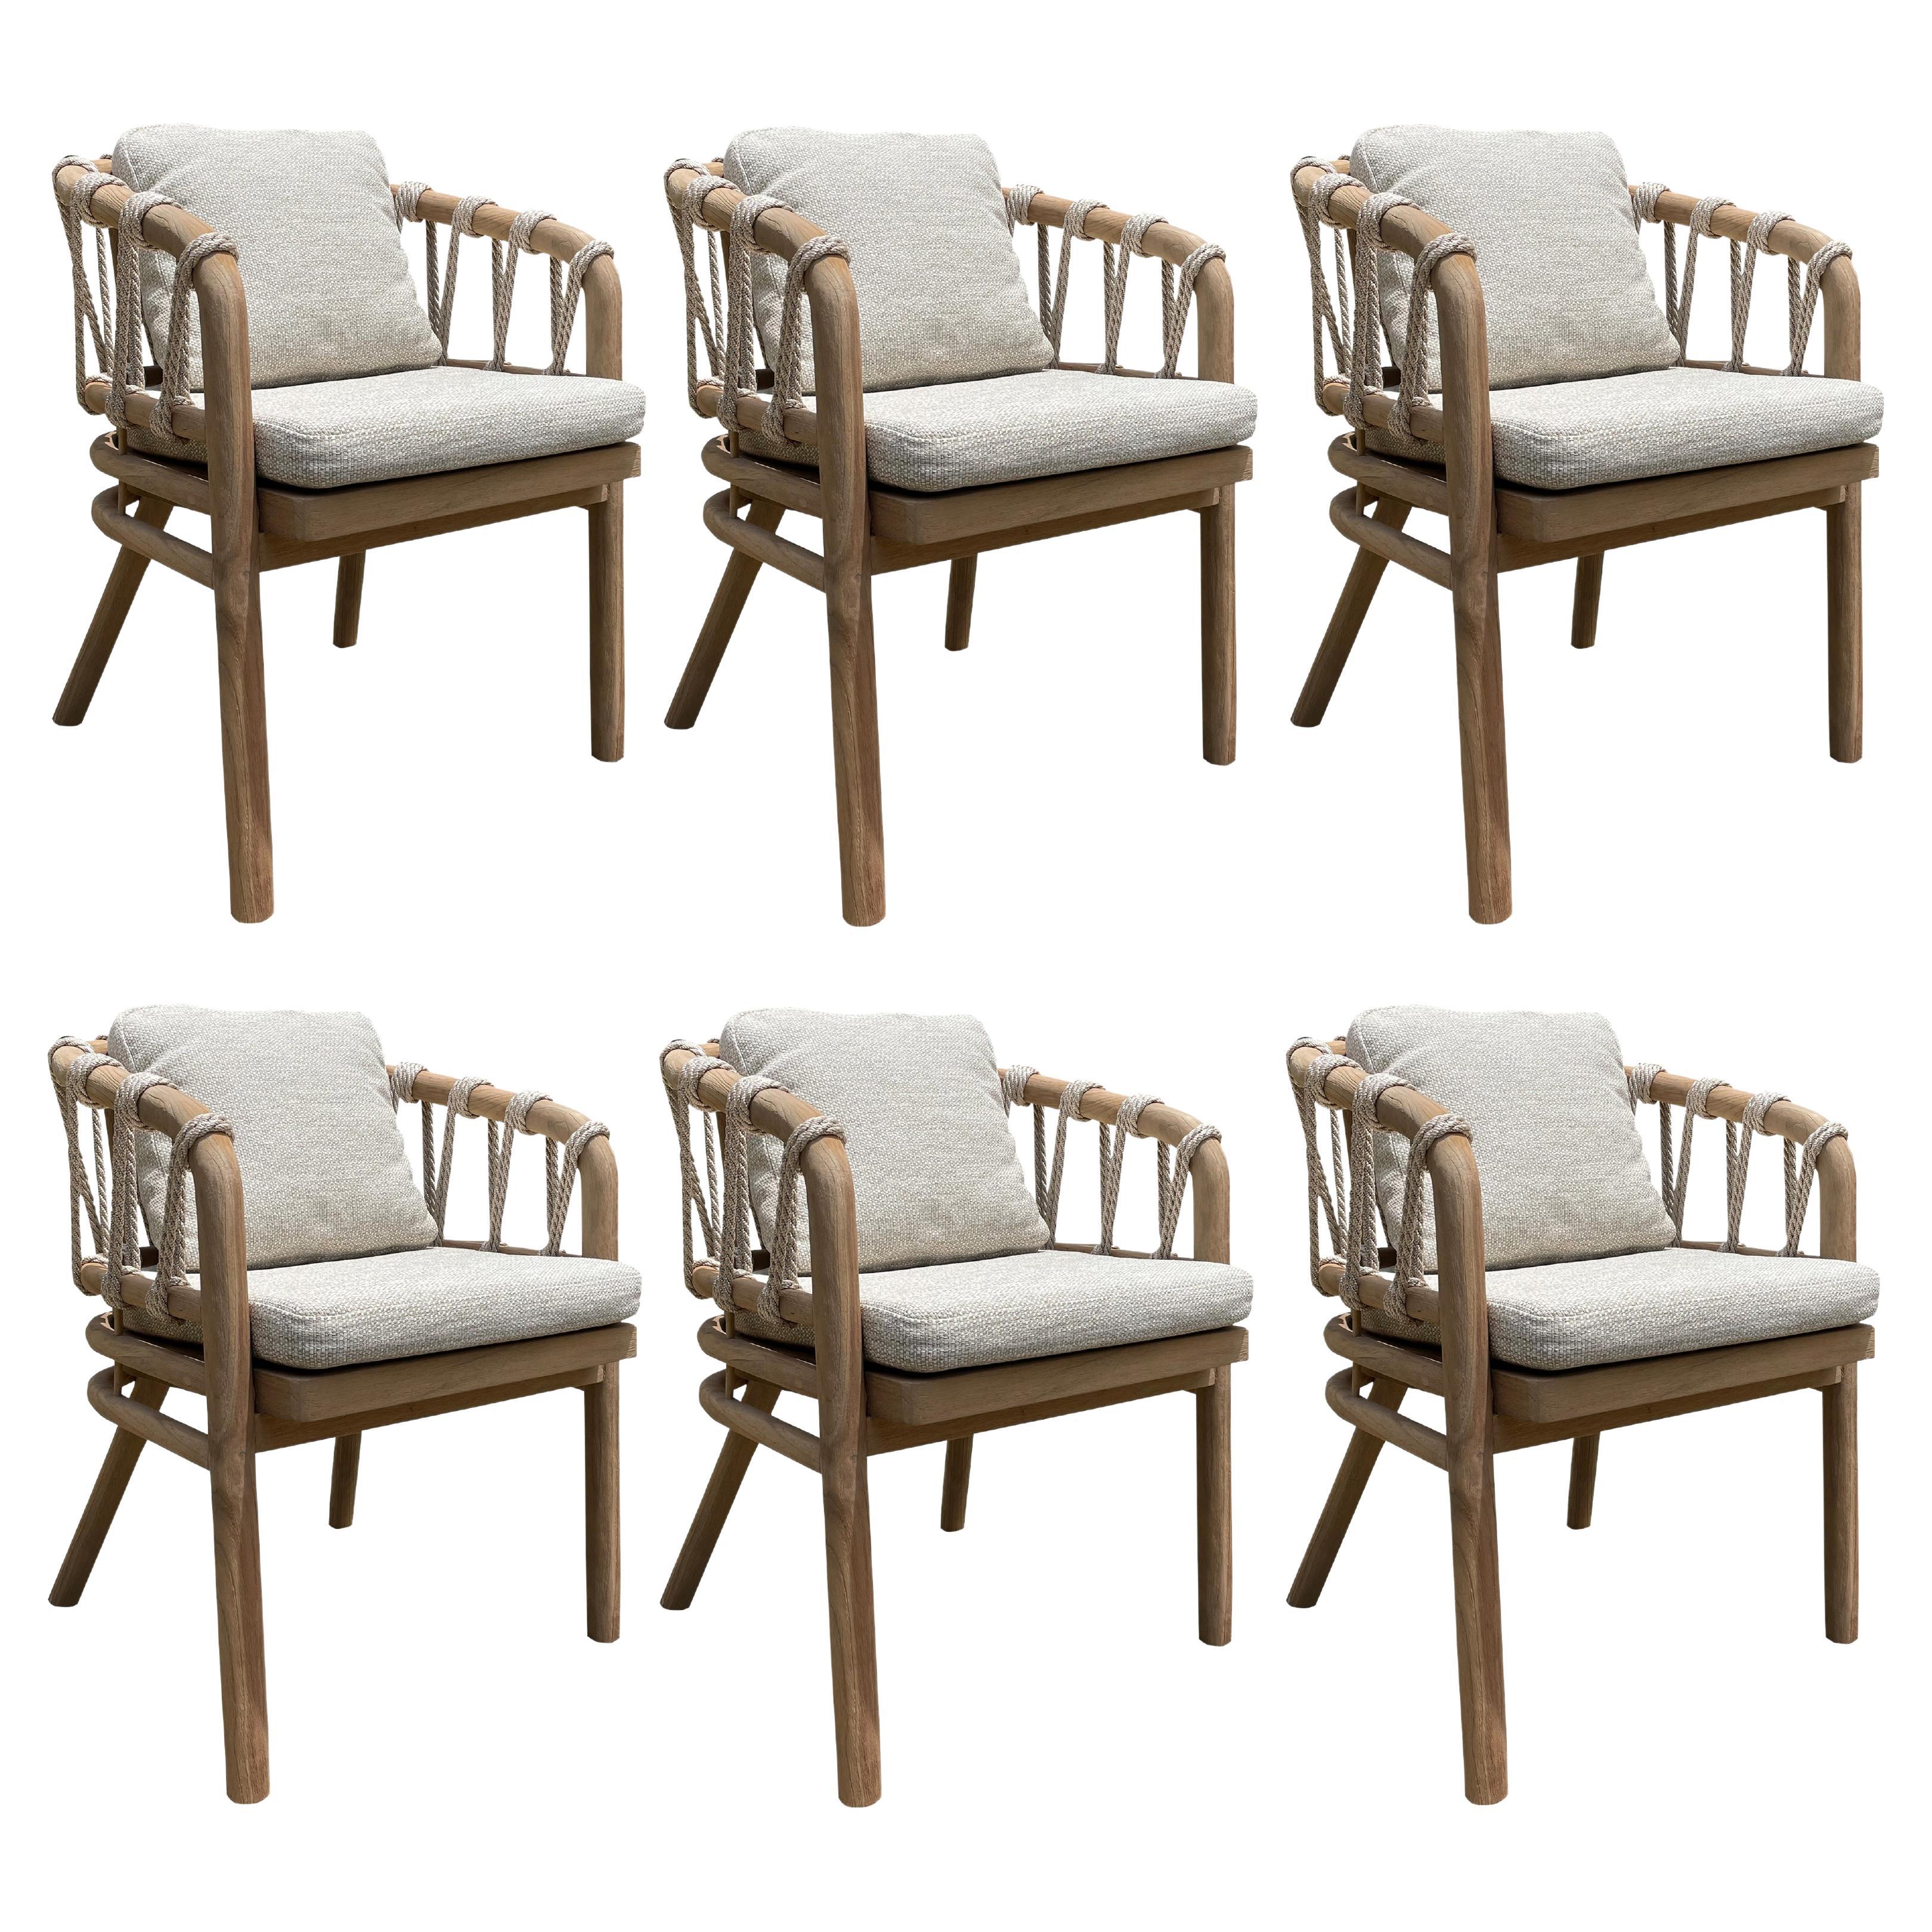 Outdoor Dining Chairs In Natural Solid Teak (Set Of 6)